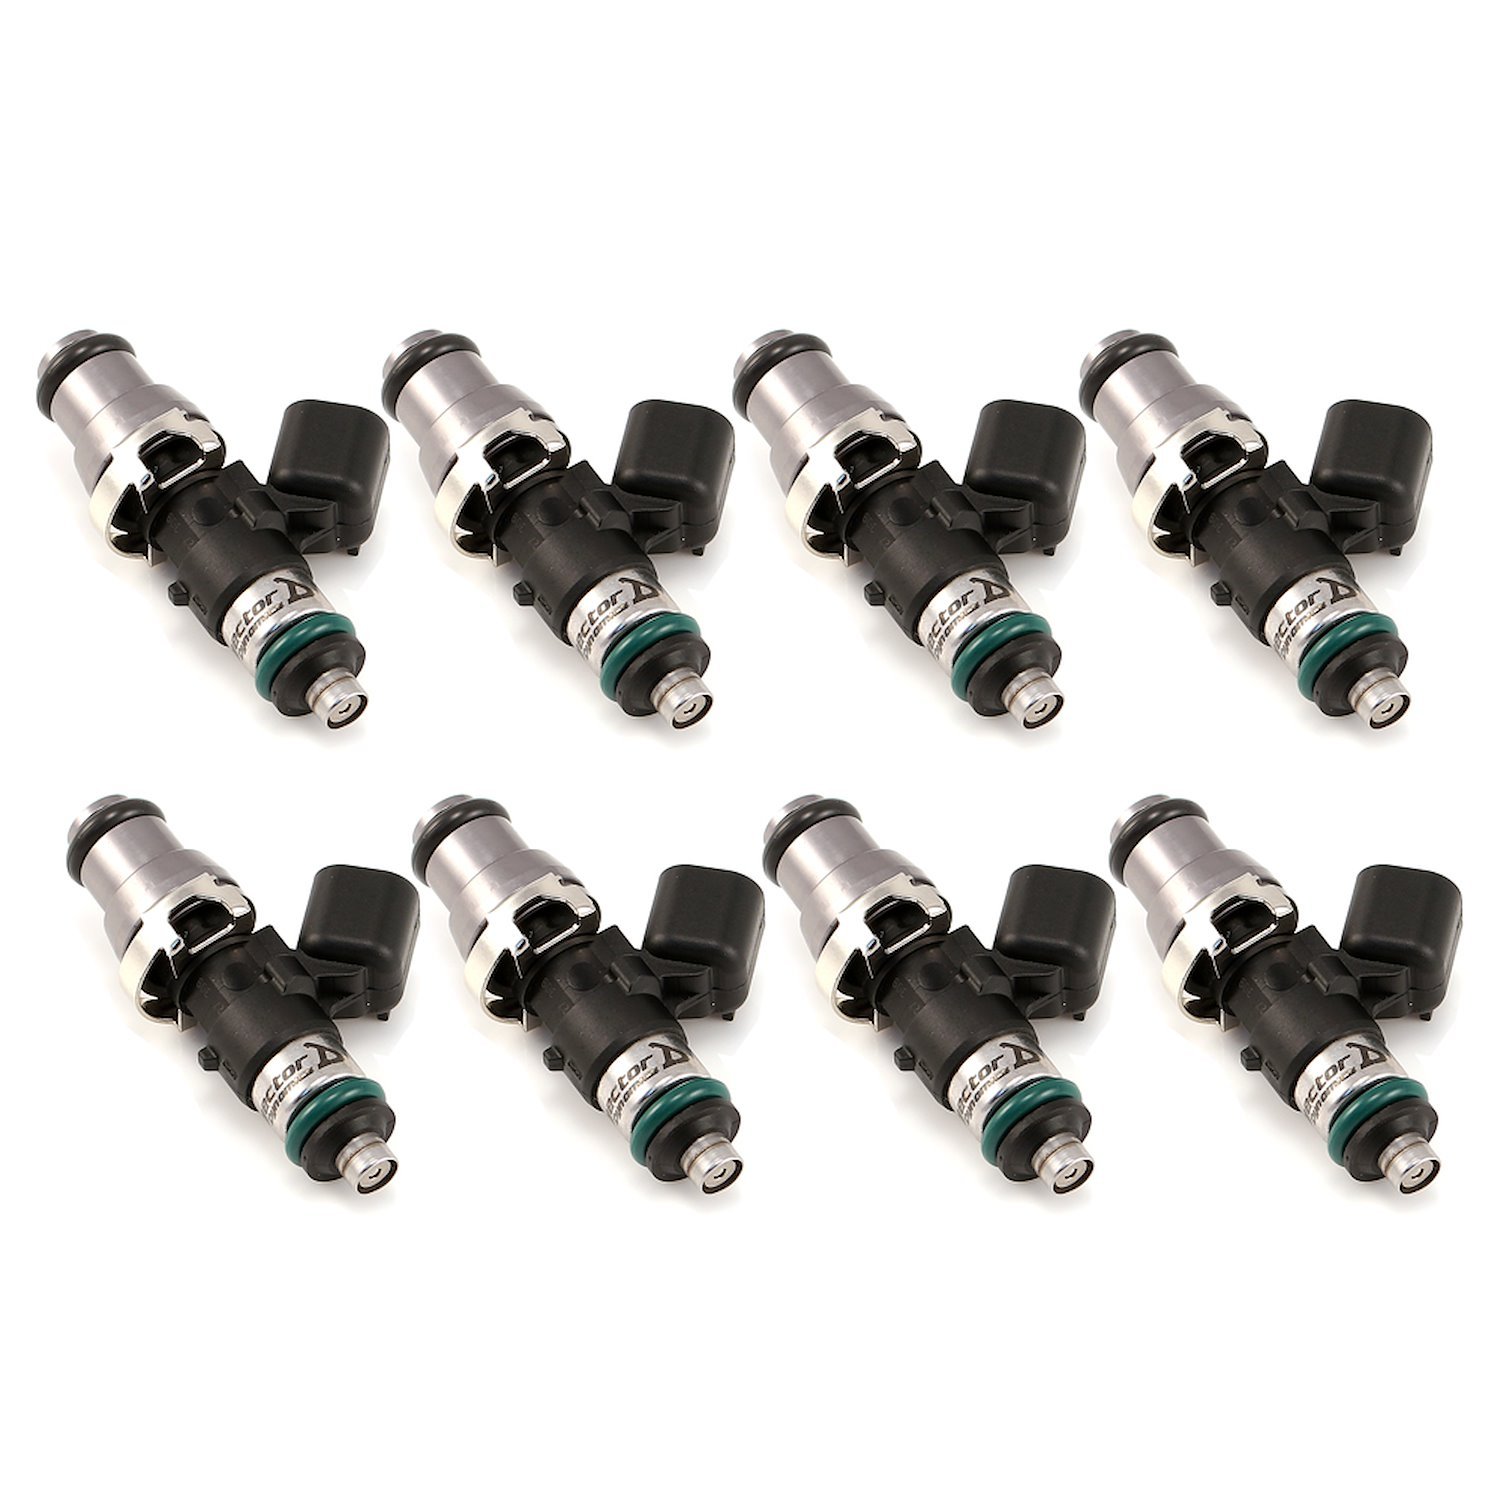 1300.48.14.14.8 1340cc Fuel Injector Set, 48 mm Length, 14 mm Grey Top, 14 mm Lower O-Ring